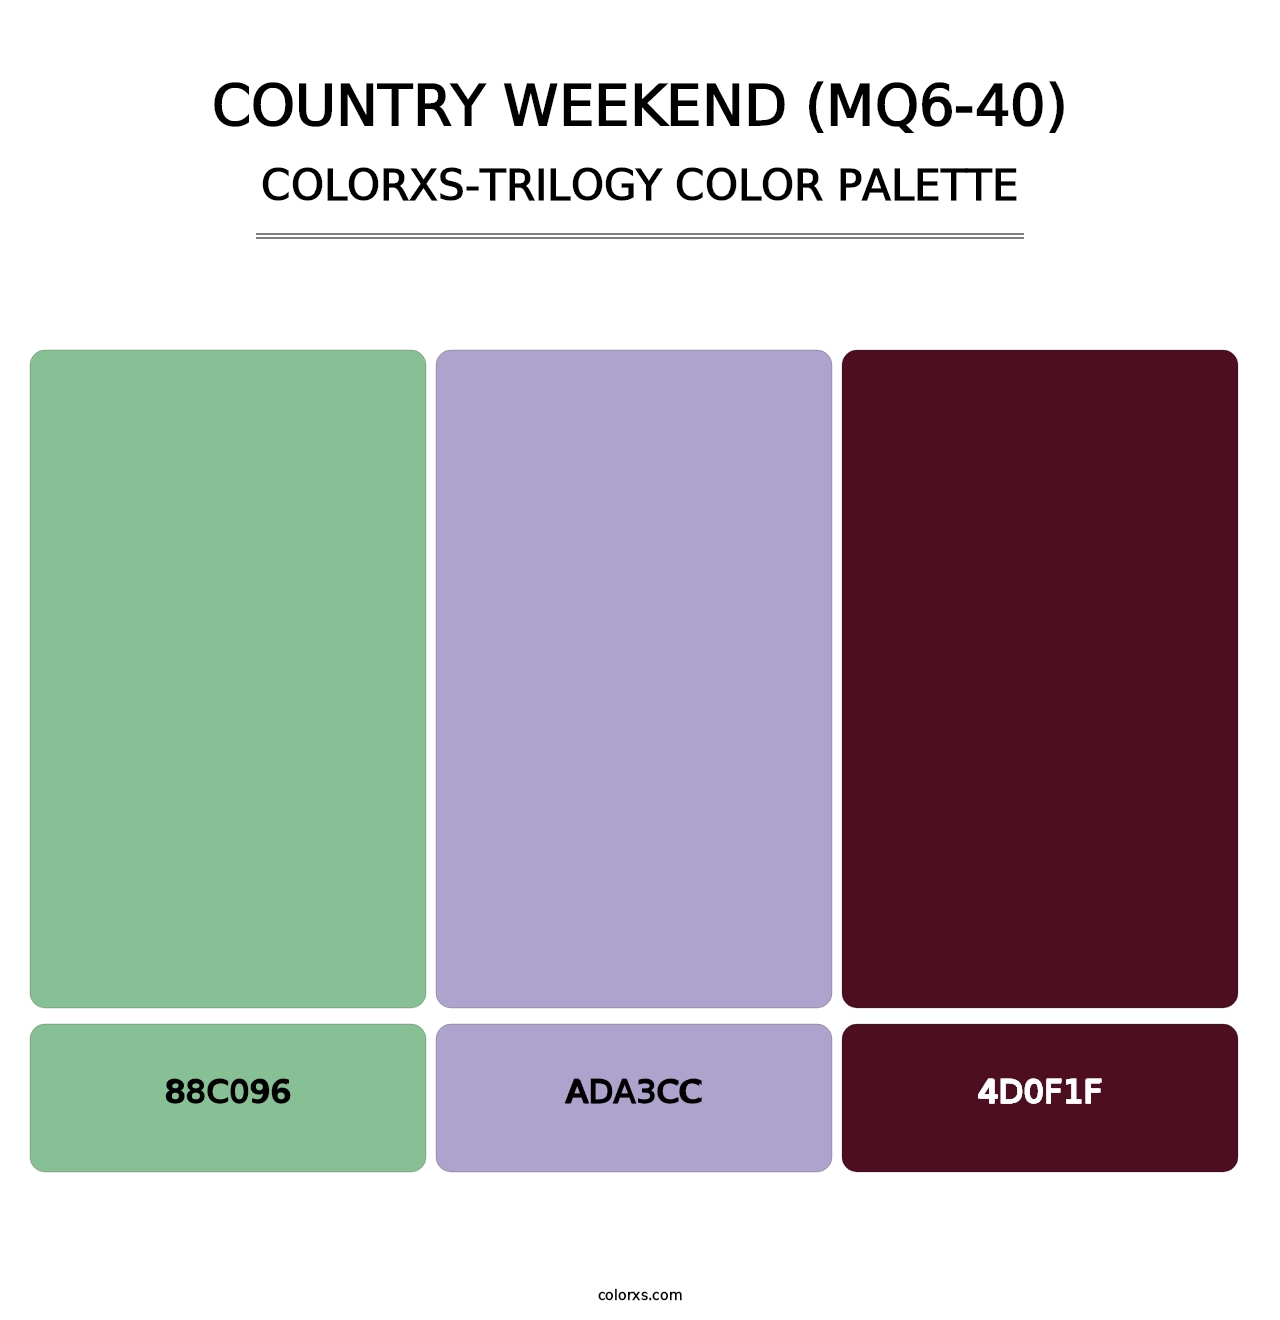 Country Weekend (MQ6-40) - Colorxs Trilogy Palette